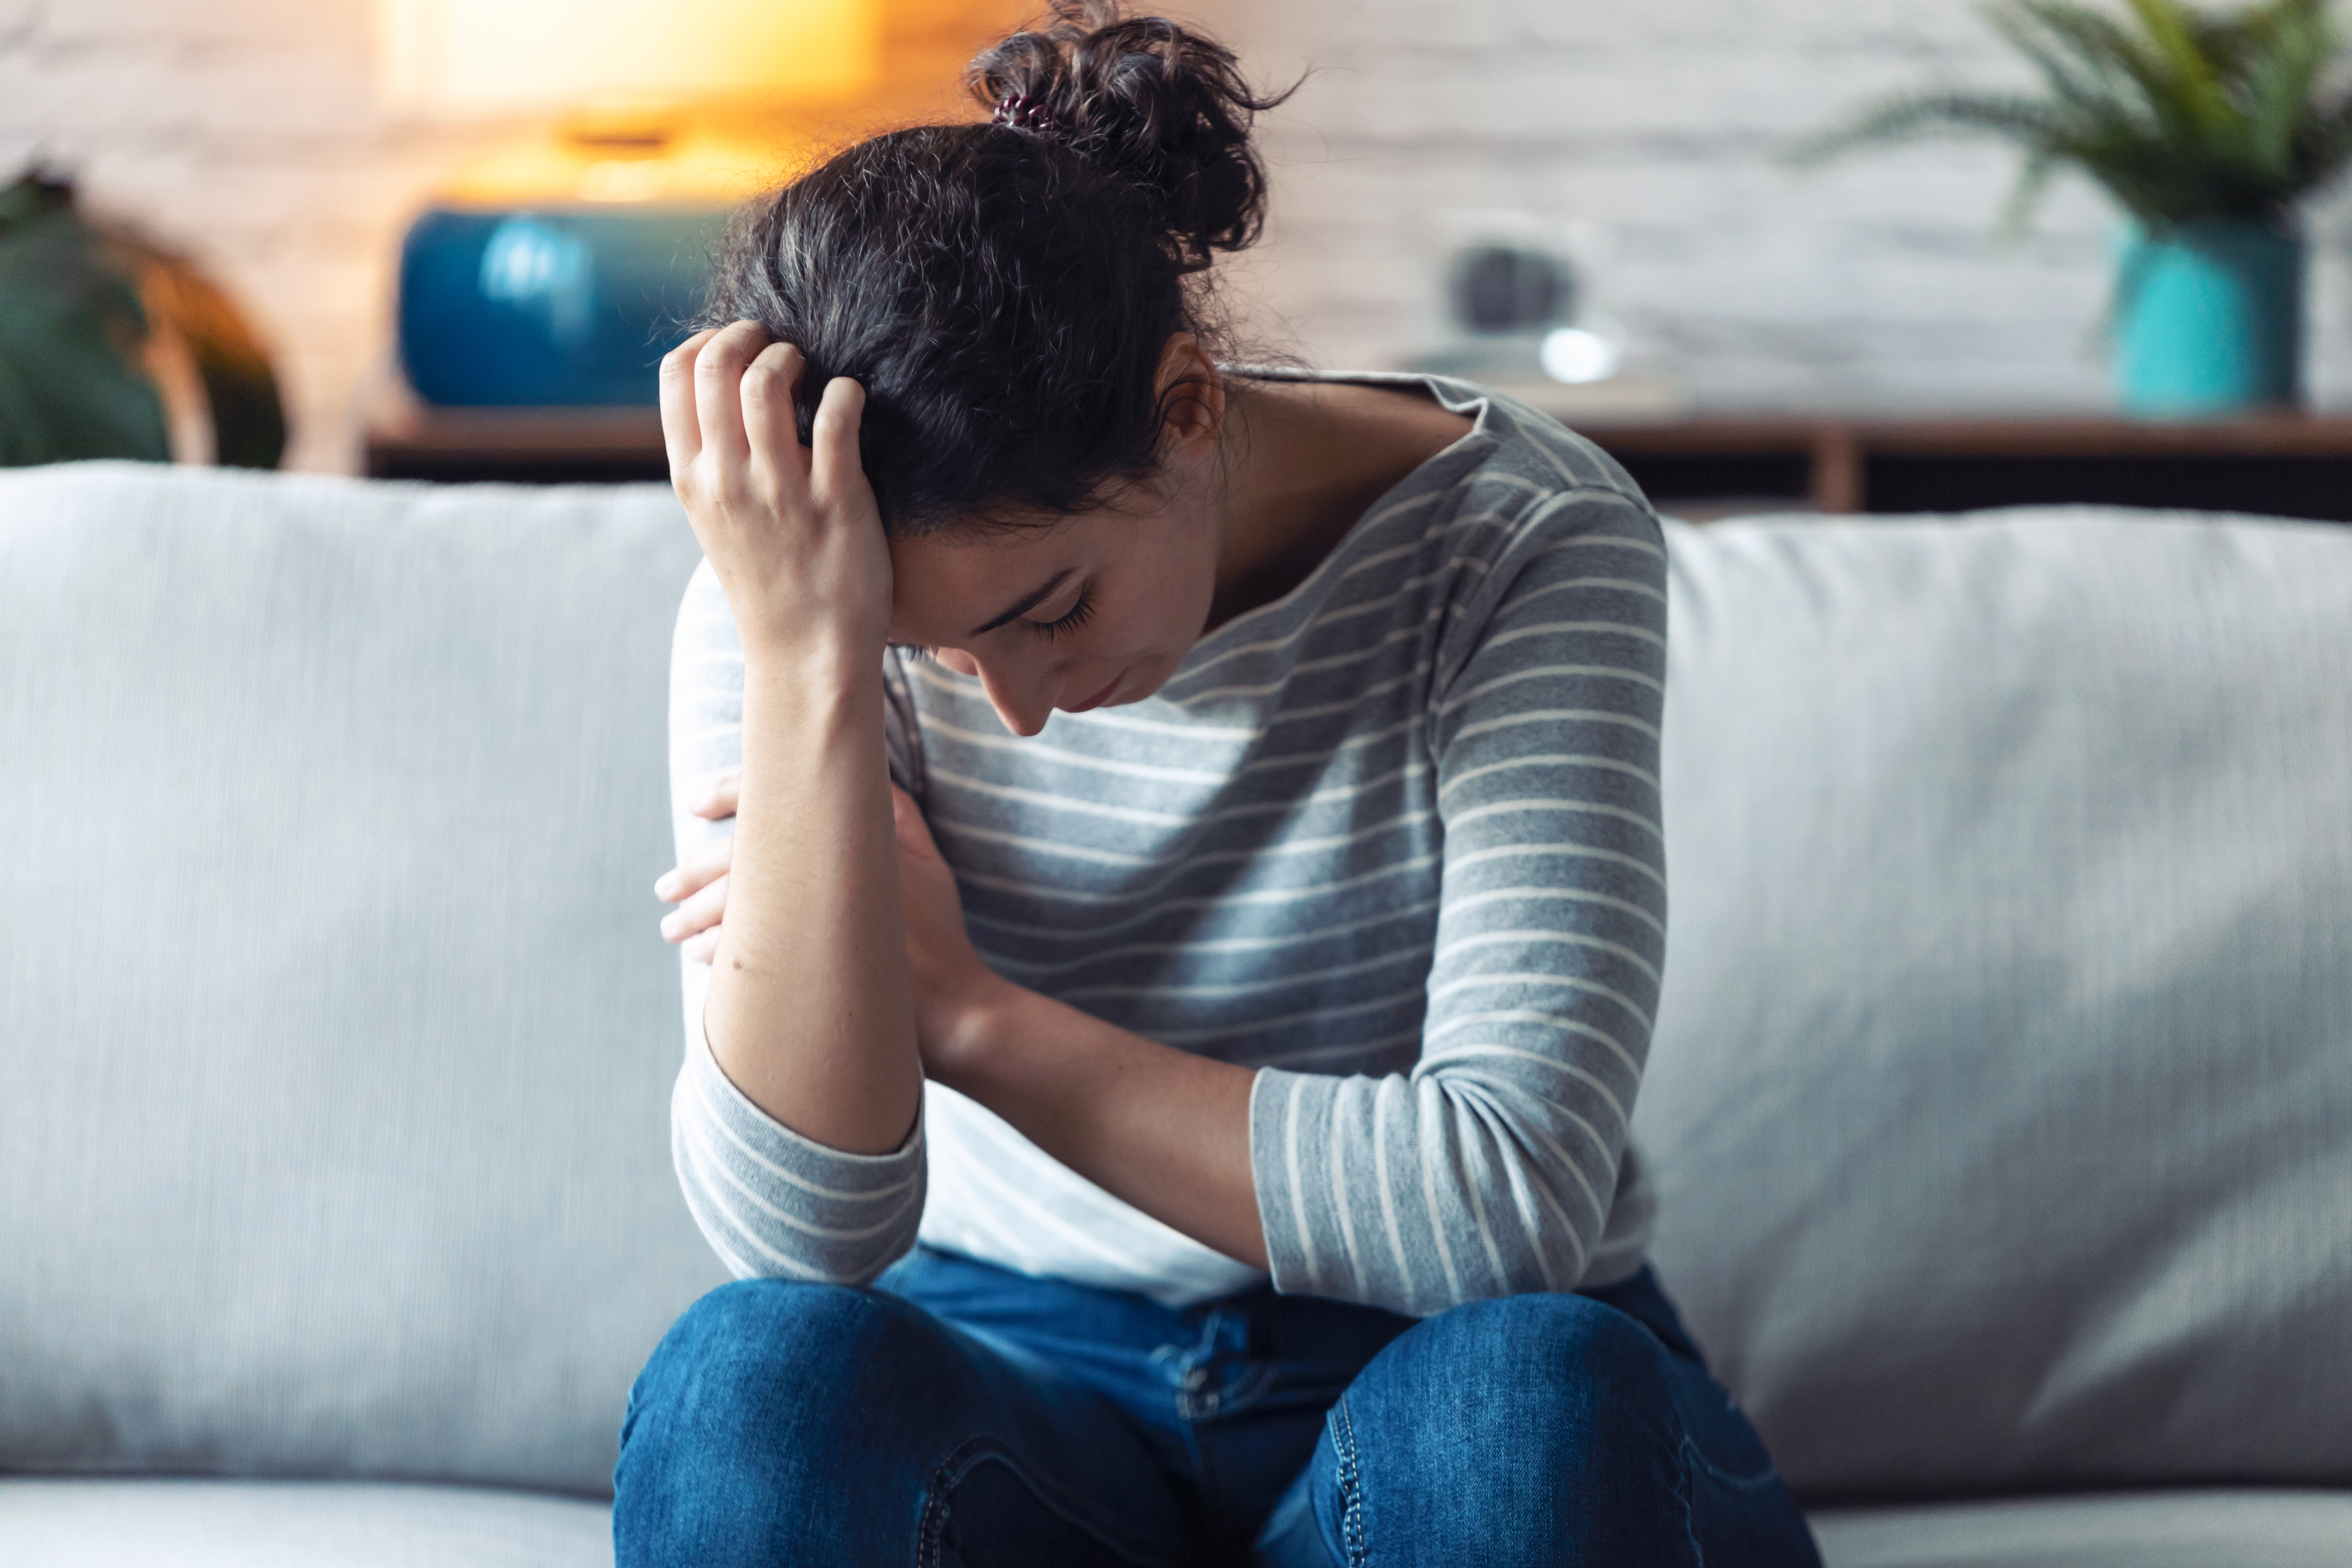 A woman sitting on the couch looking sad | Source: Shutterstock